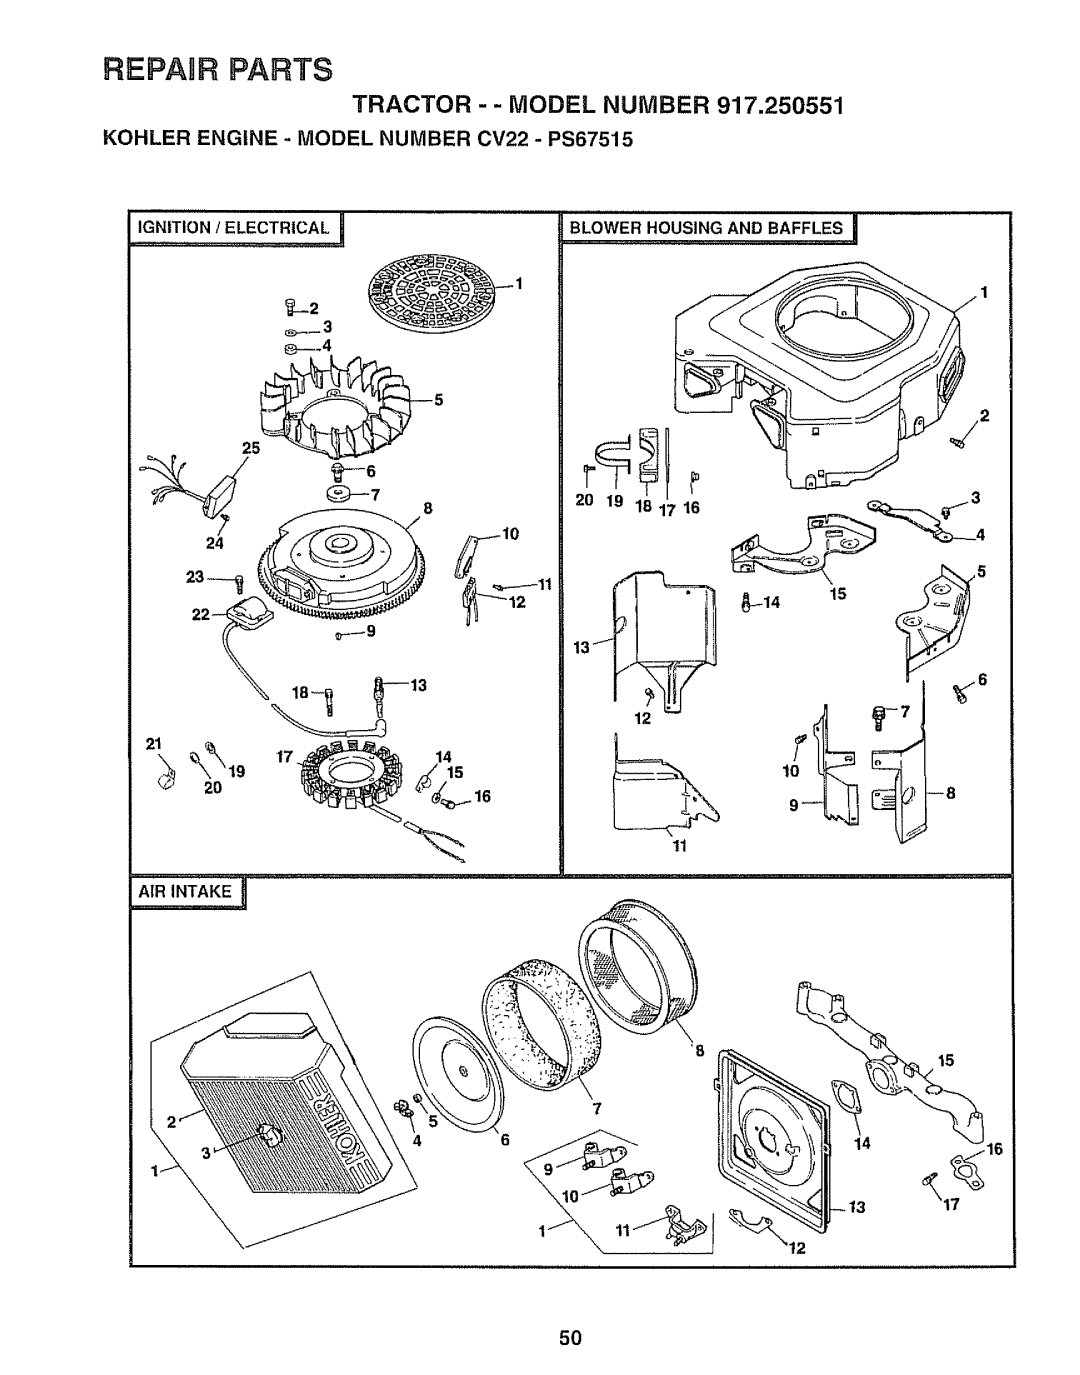 Sears 917.250551 manual Ignition / Electrical, Blower Housing And Baffles, _1._5, AIR INTAKE 7 4 16, _2 O, Repair Parts 